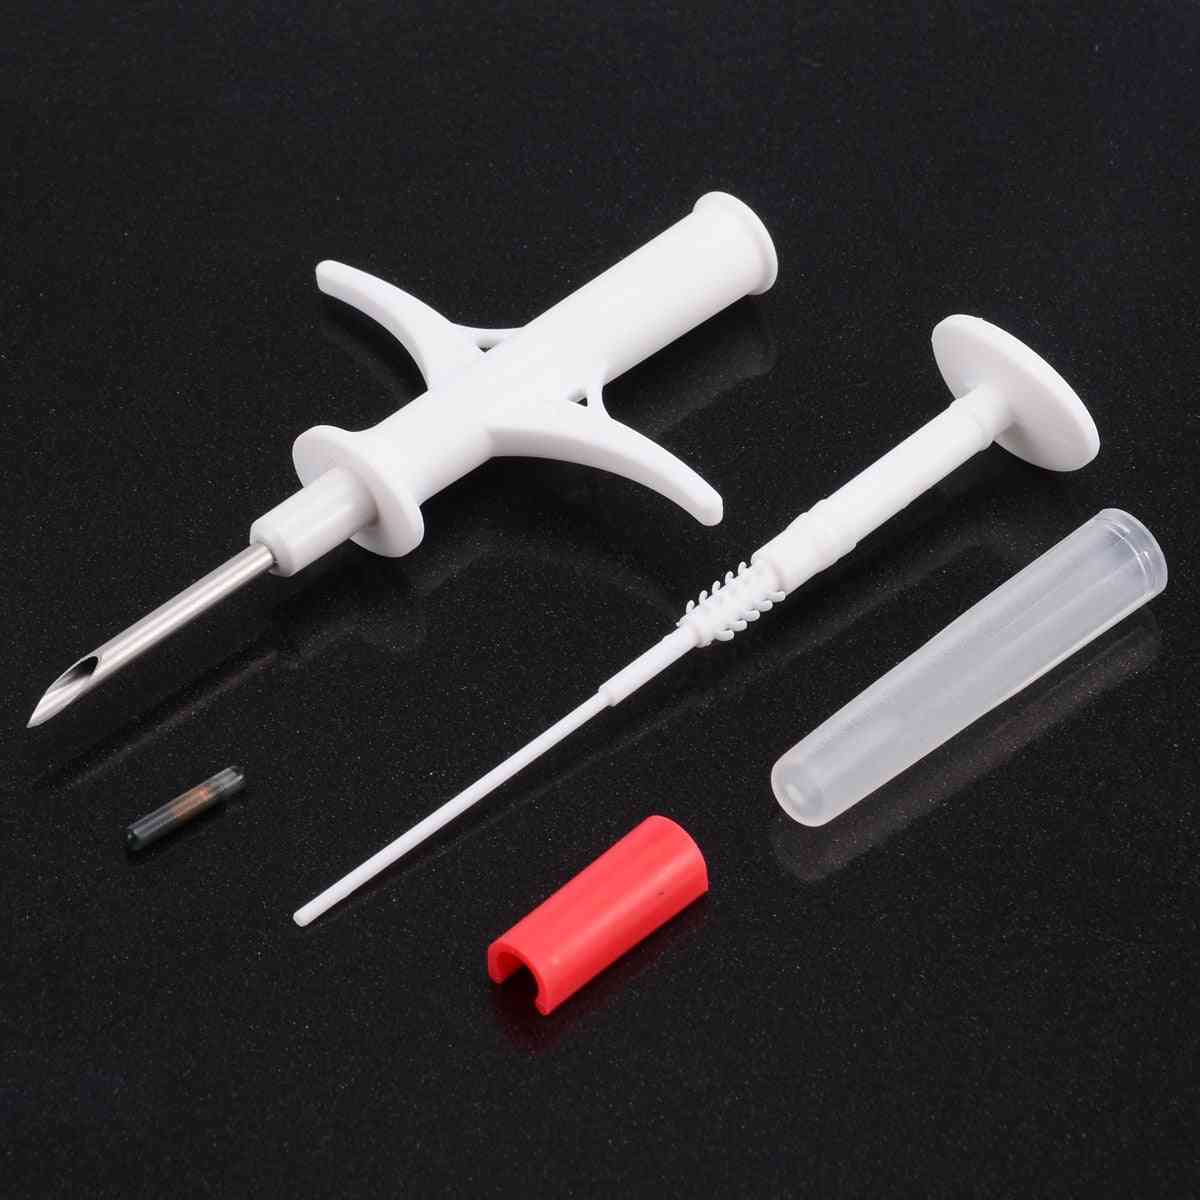 Standard Pet Rfid Injector Syringe Microchip For Horses, Dogs, Cats